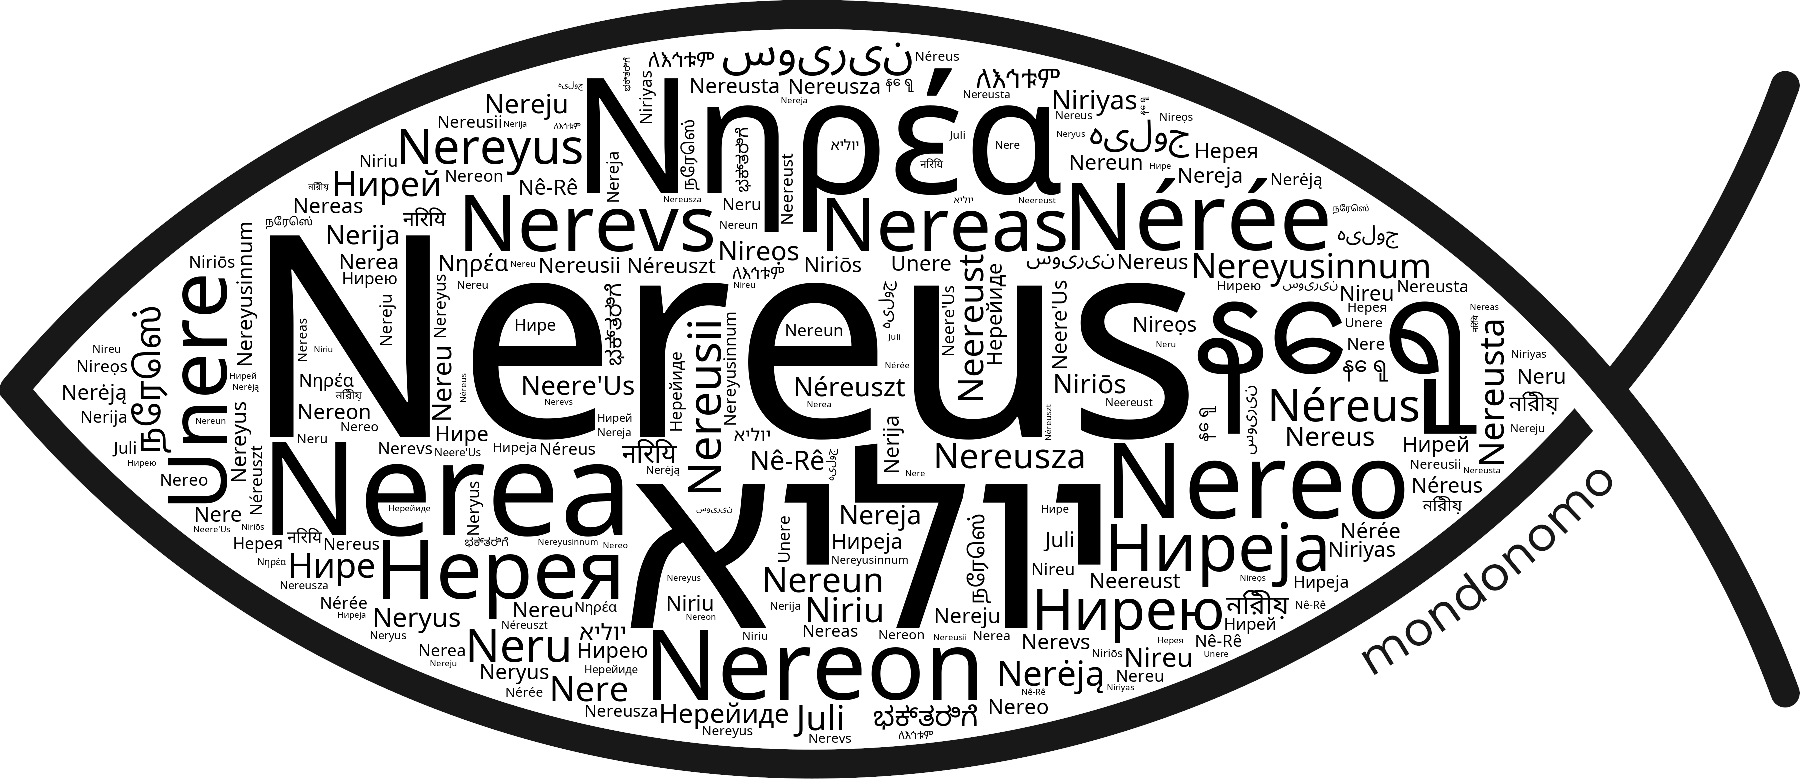 Name Nereus in the world's Bibles